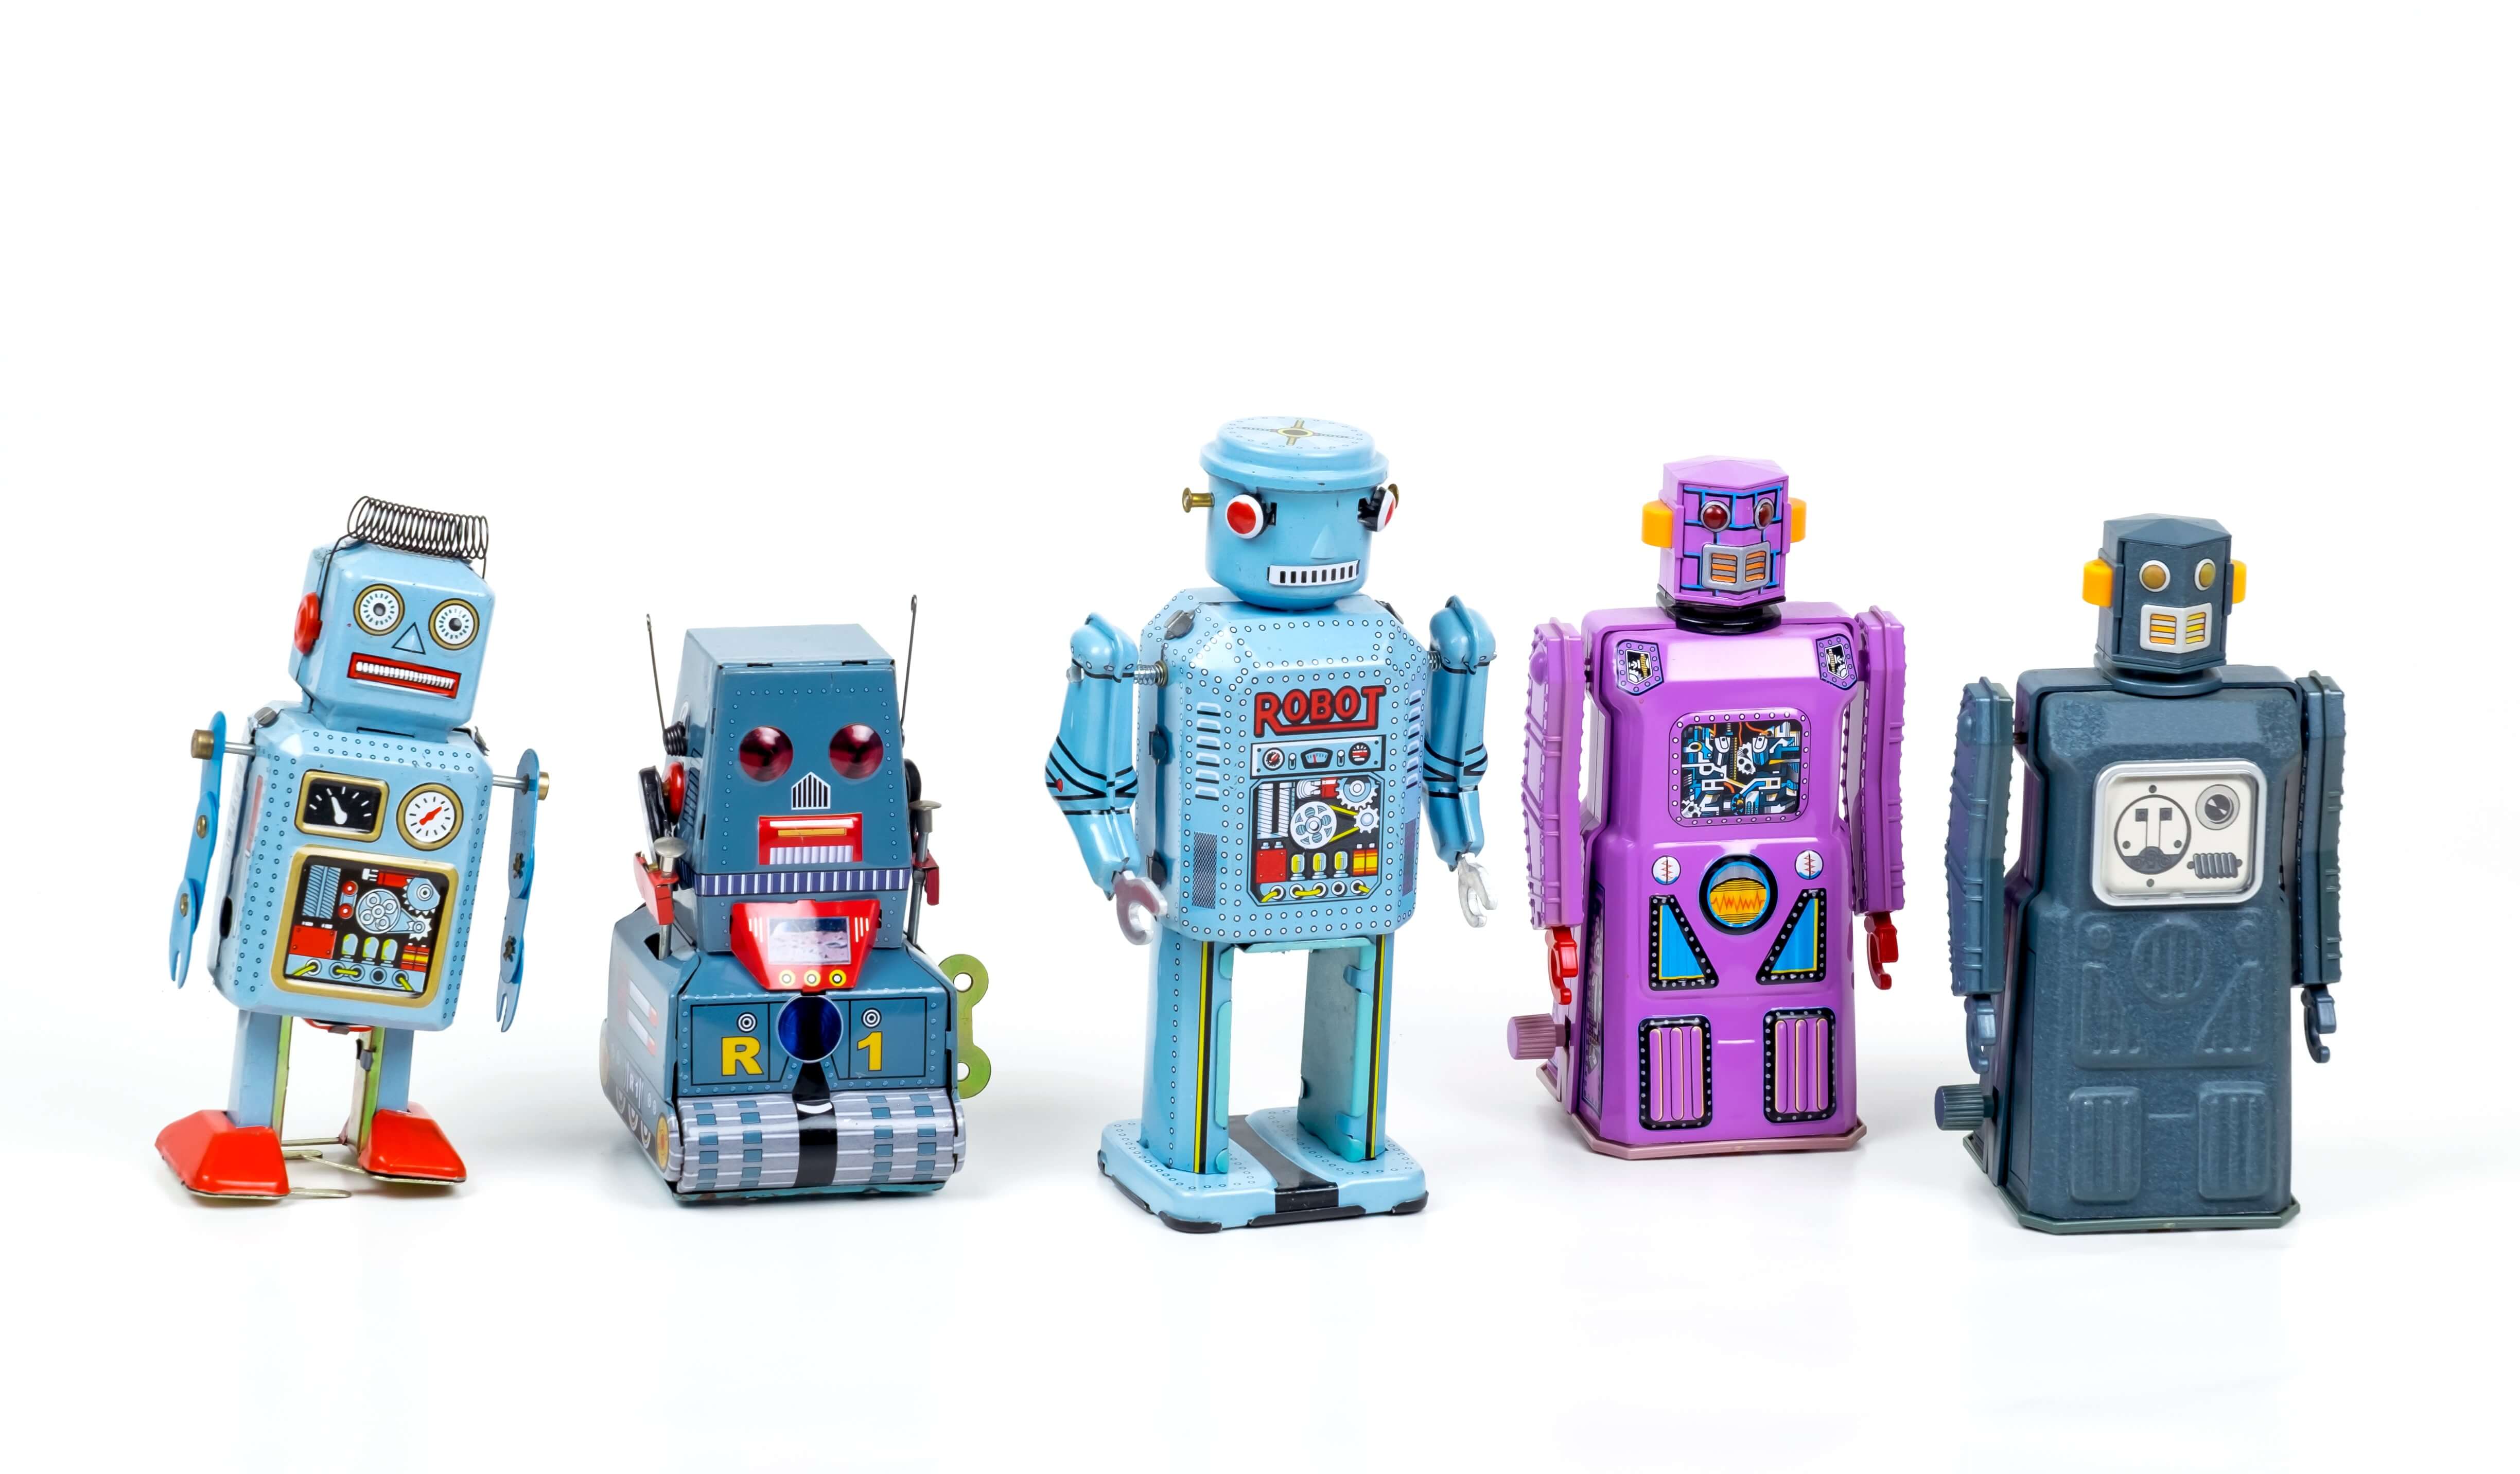 5 toy mechanical robots standing in a row